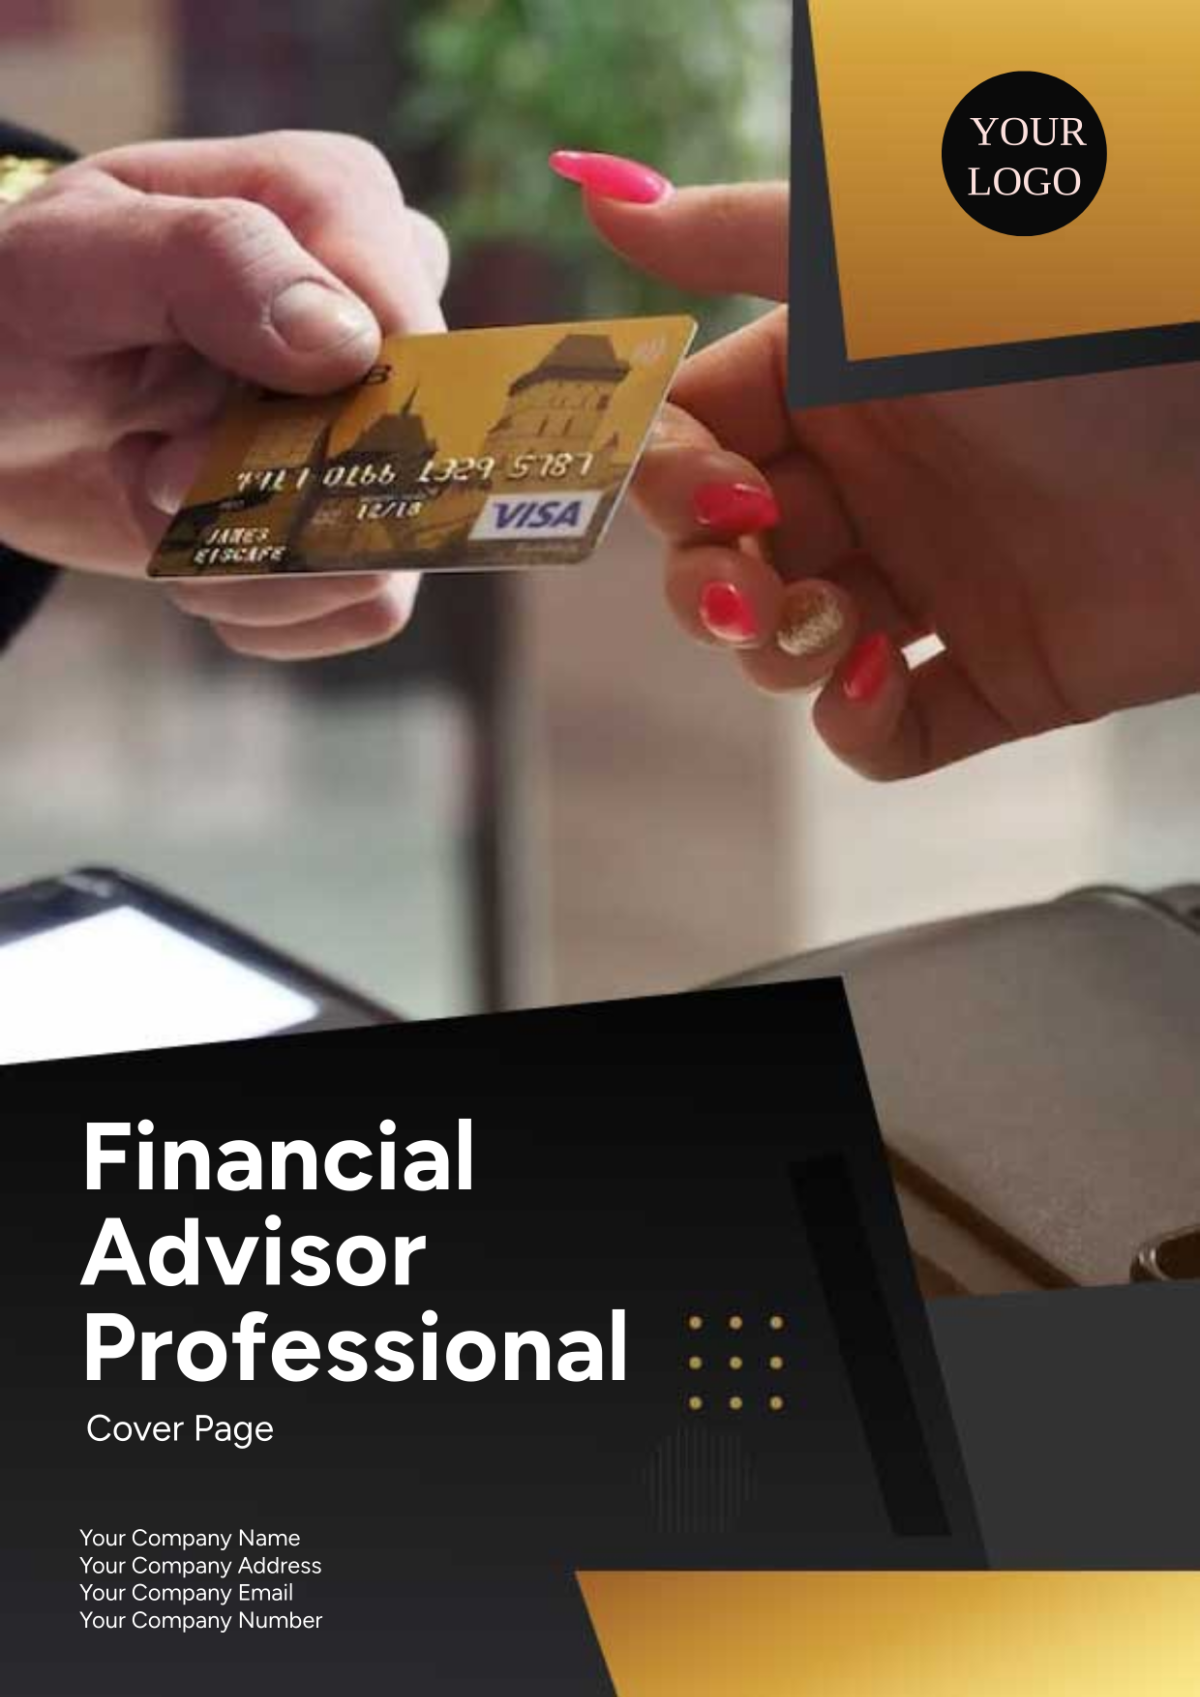 Financial Advisor Professional Cover Page